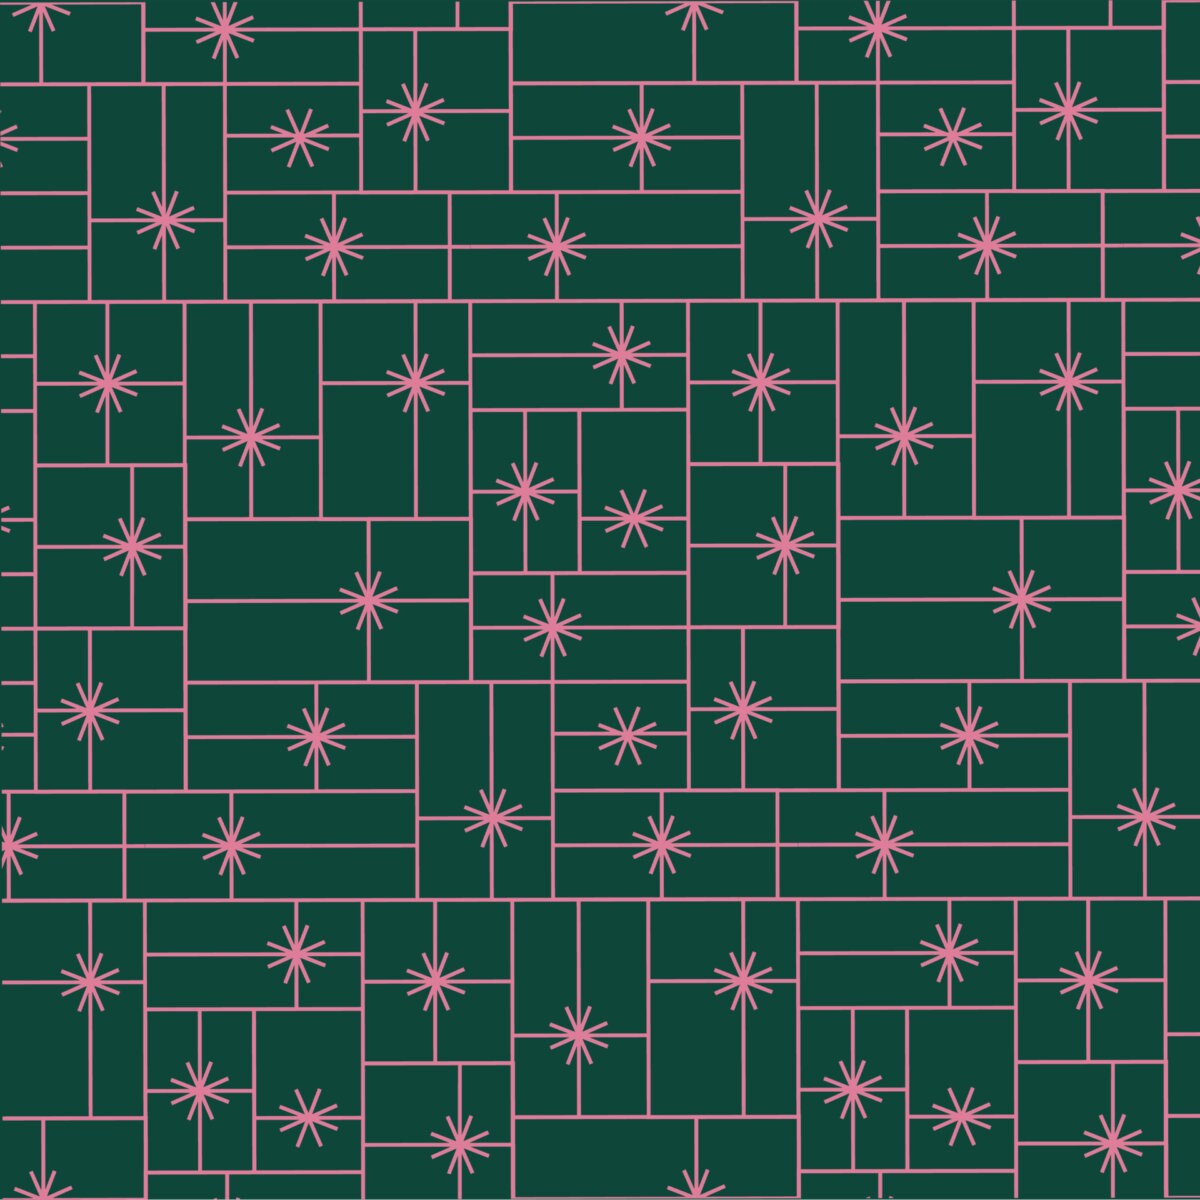 Holiday Patterns 2 XIII, Surface Design